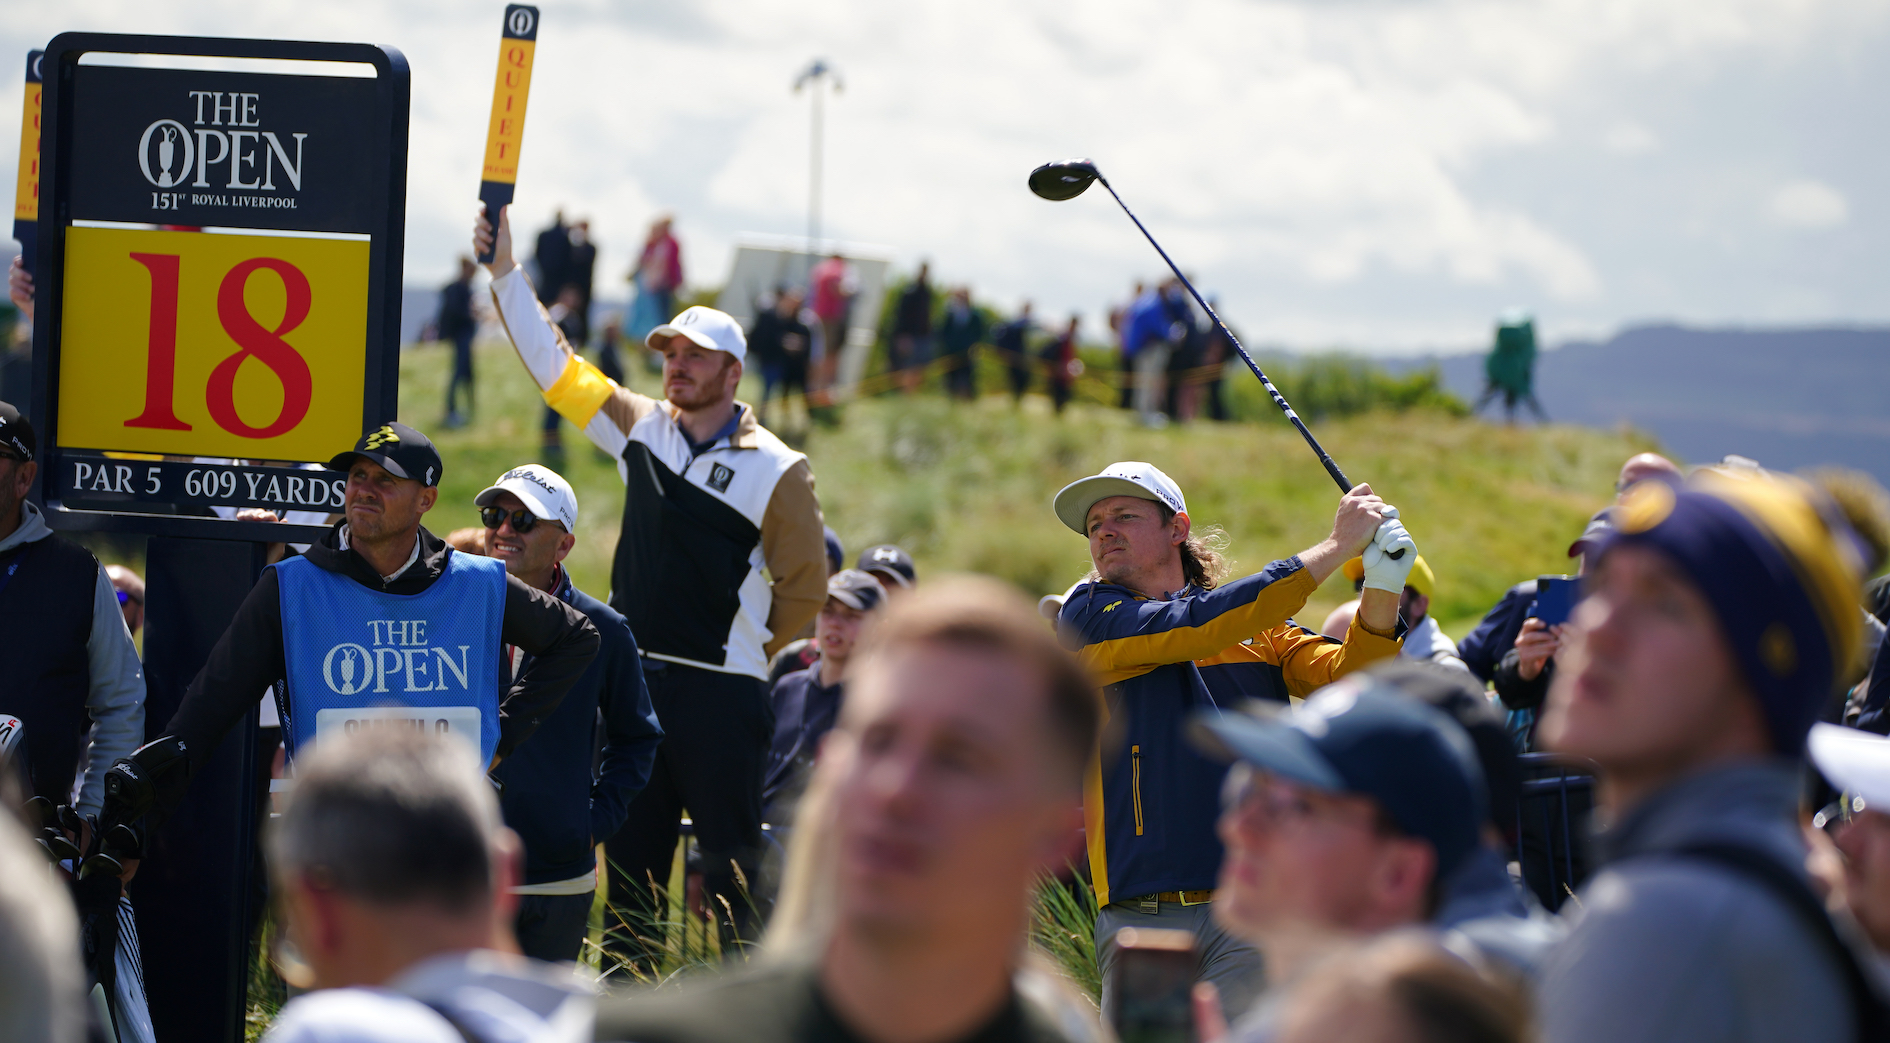 How to watch The Open